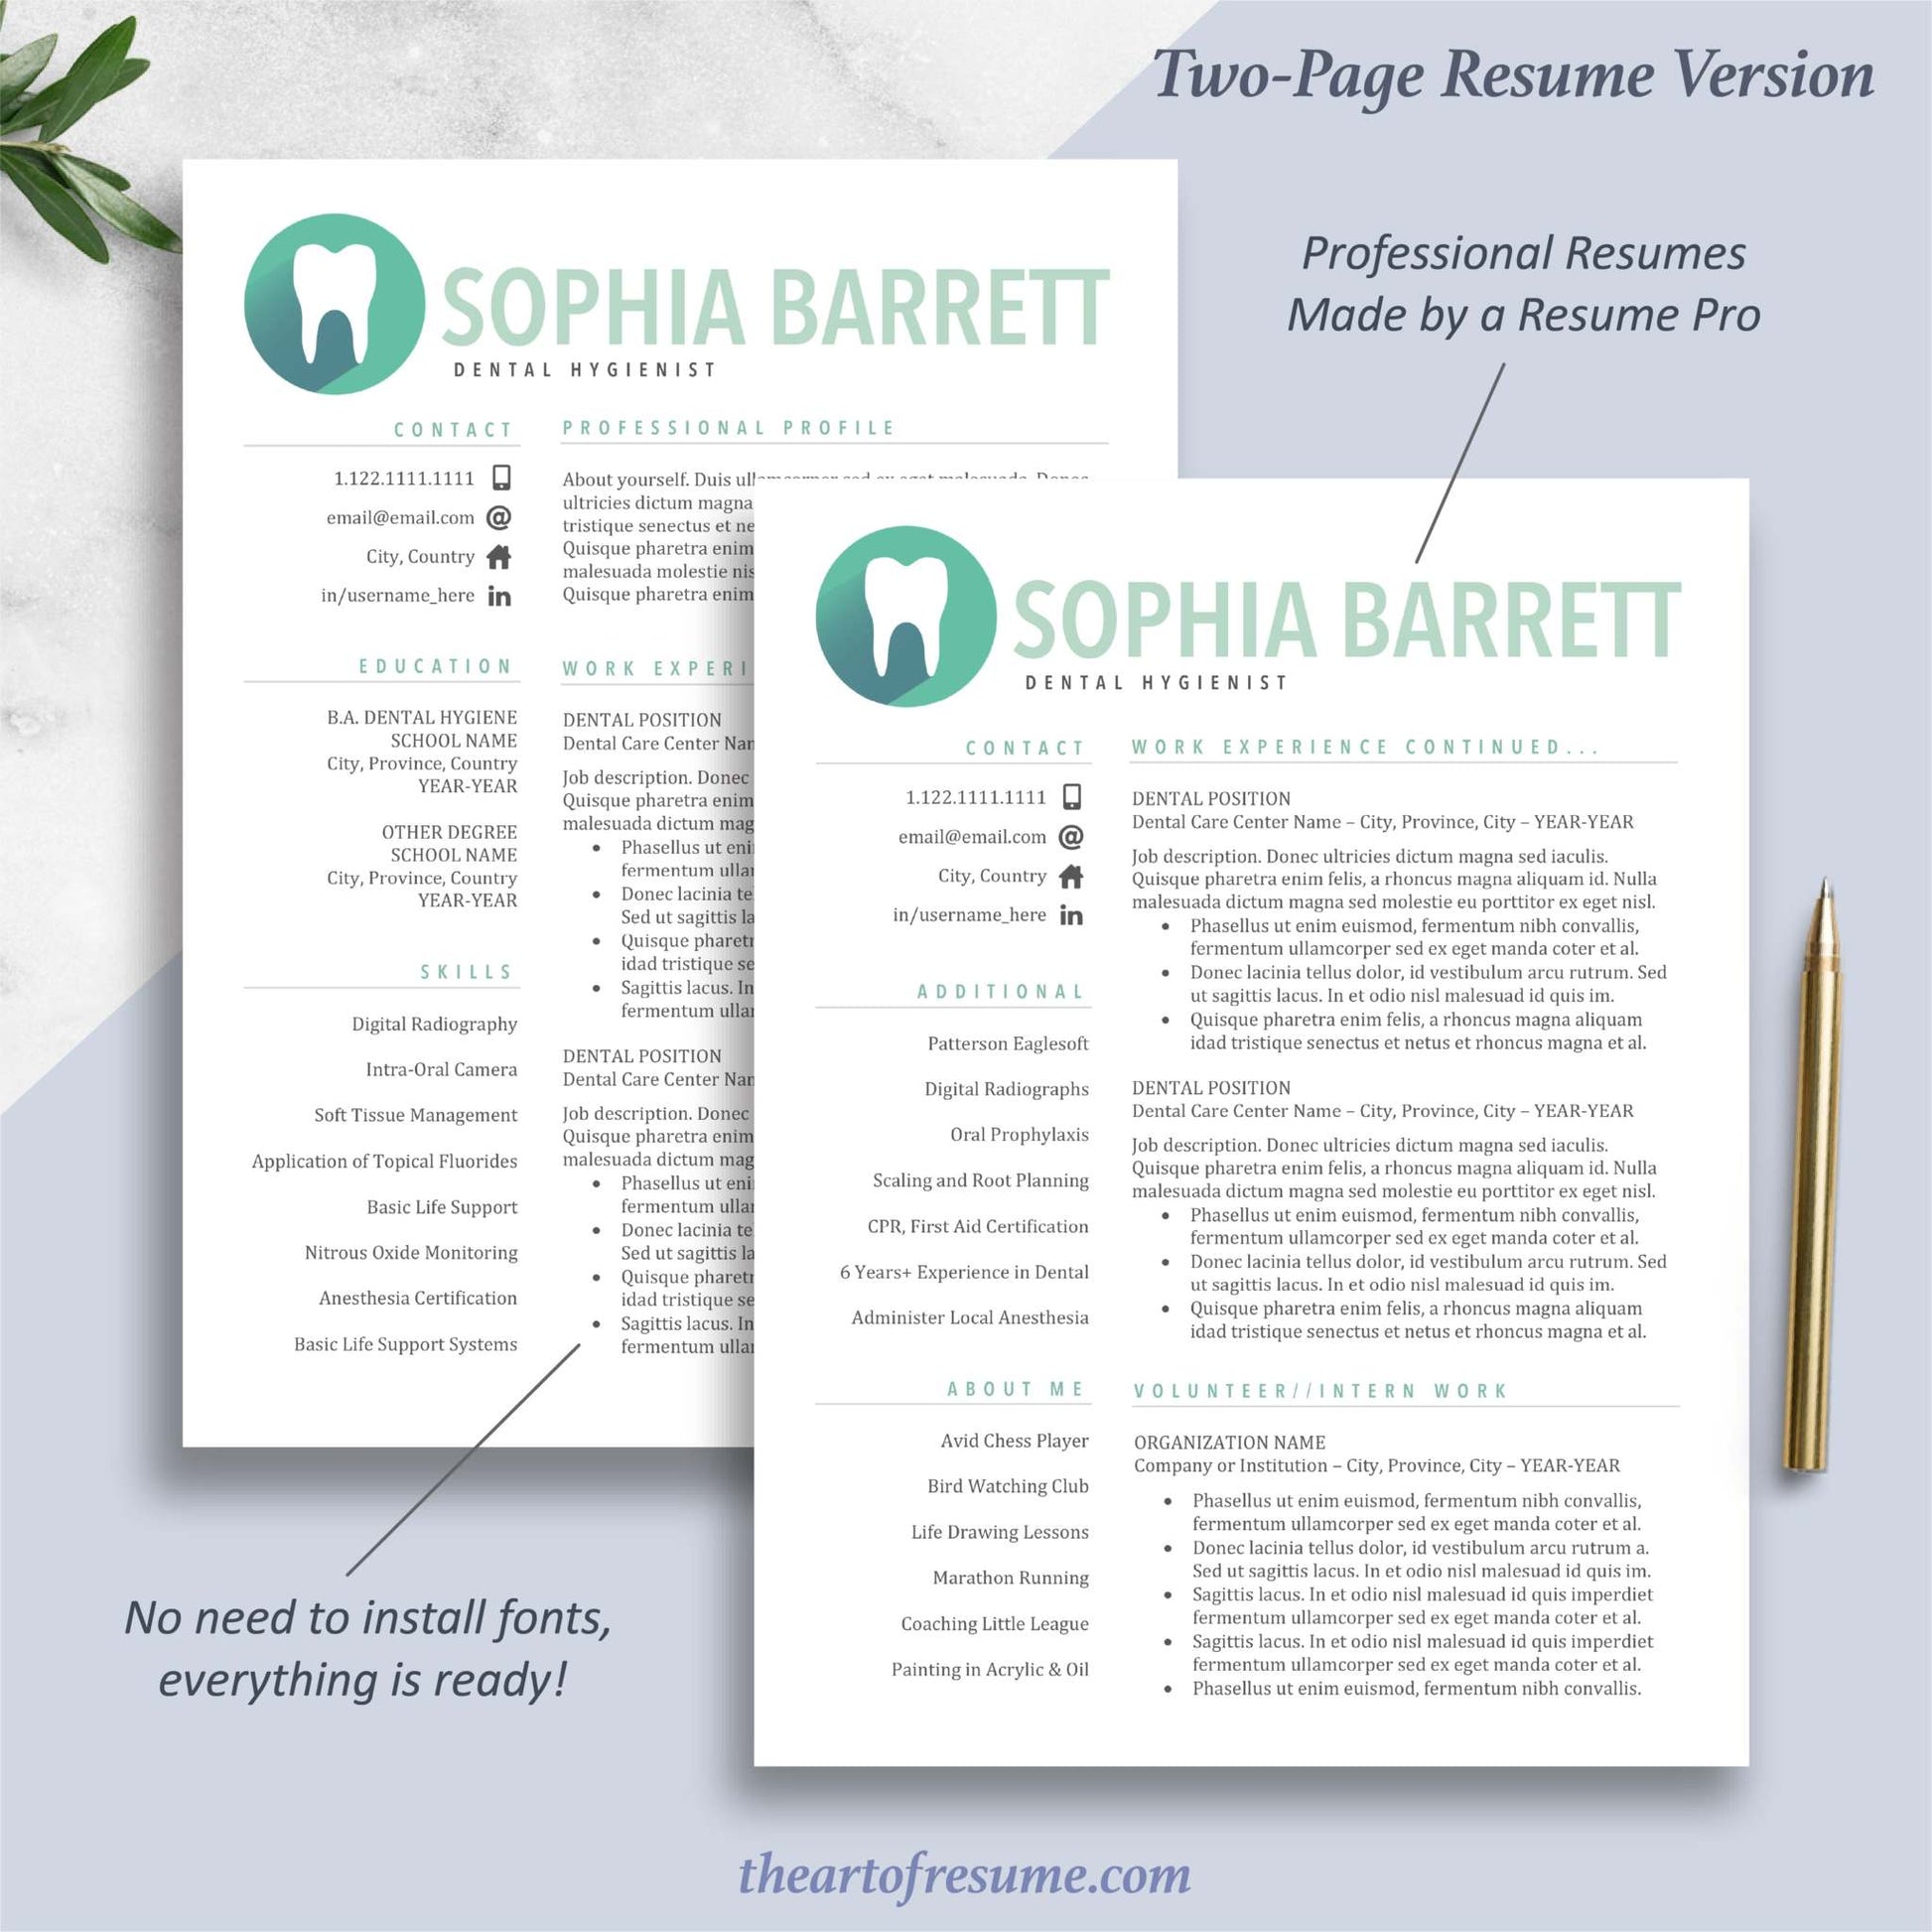 Two-Page One-Page Medical, Nurse, Doctor, Med Student Resume CV Design Template Bundle, Instant Download Bundle for Apple Pages and Microsoft Word, Mac and PC